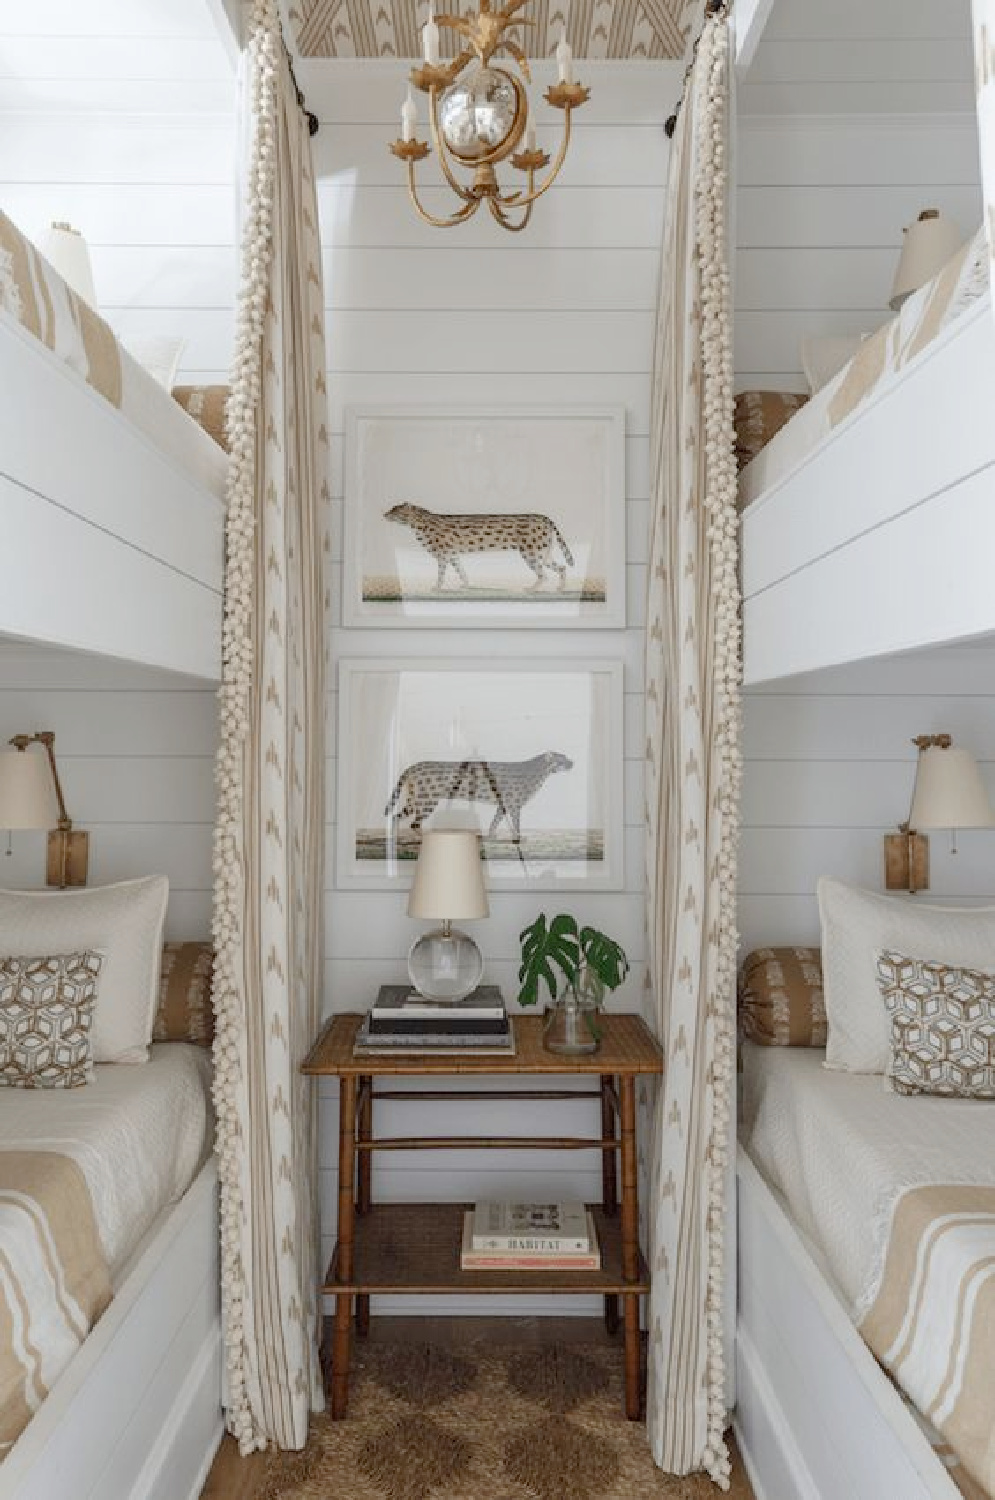 Beautiful bunk room in 2019 Southern Living Idea House. #bunkrooms #bunkbeds